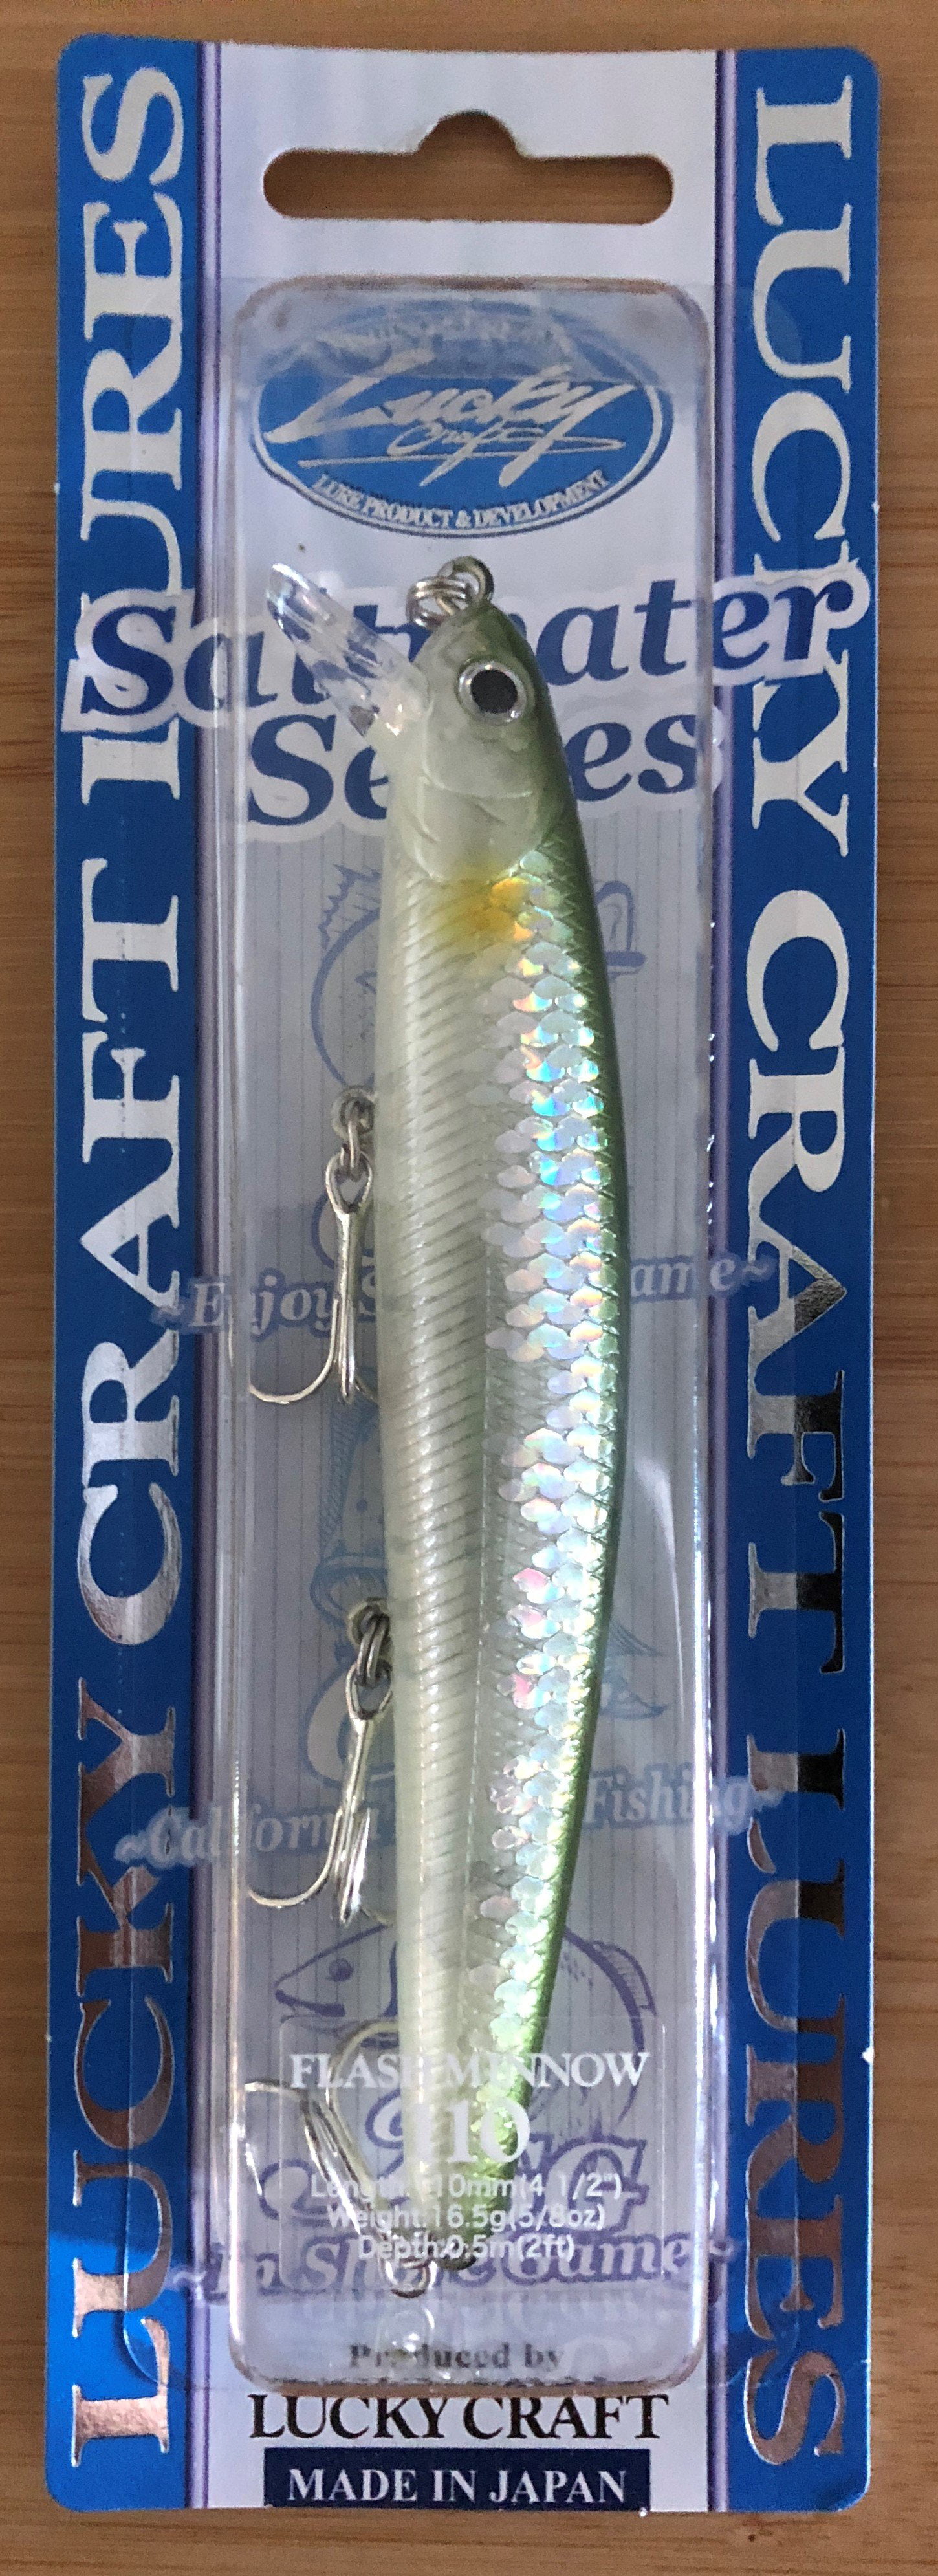 Buy Lucky Craft CIF Flash Minnow 110 Lure at Ubuy Palestine